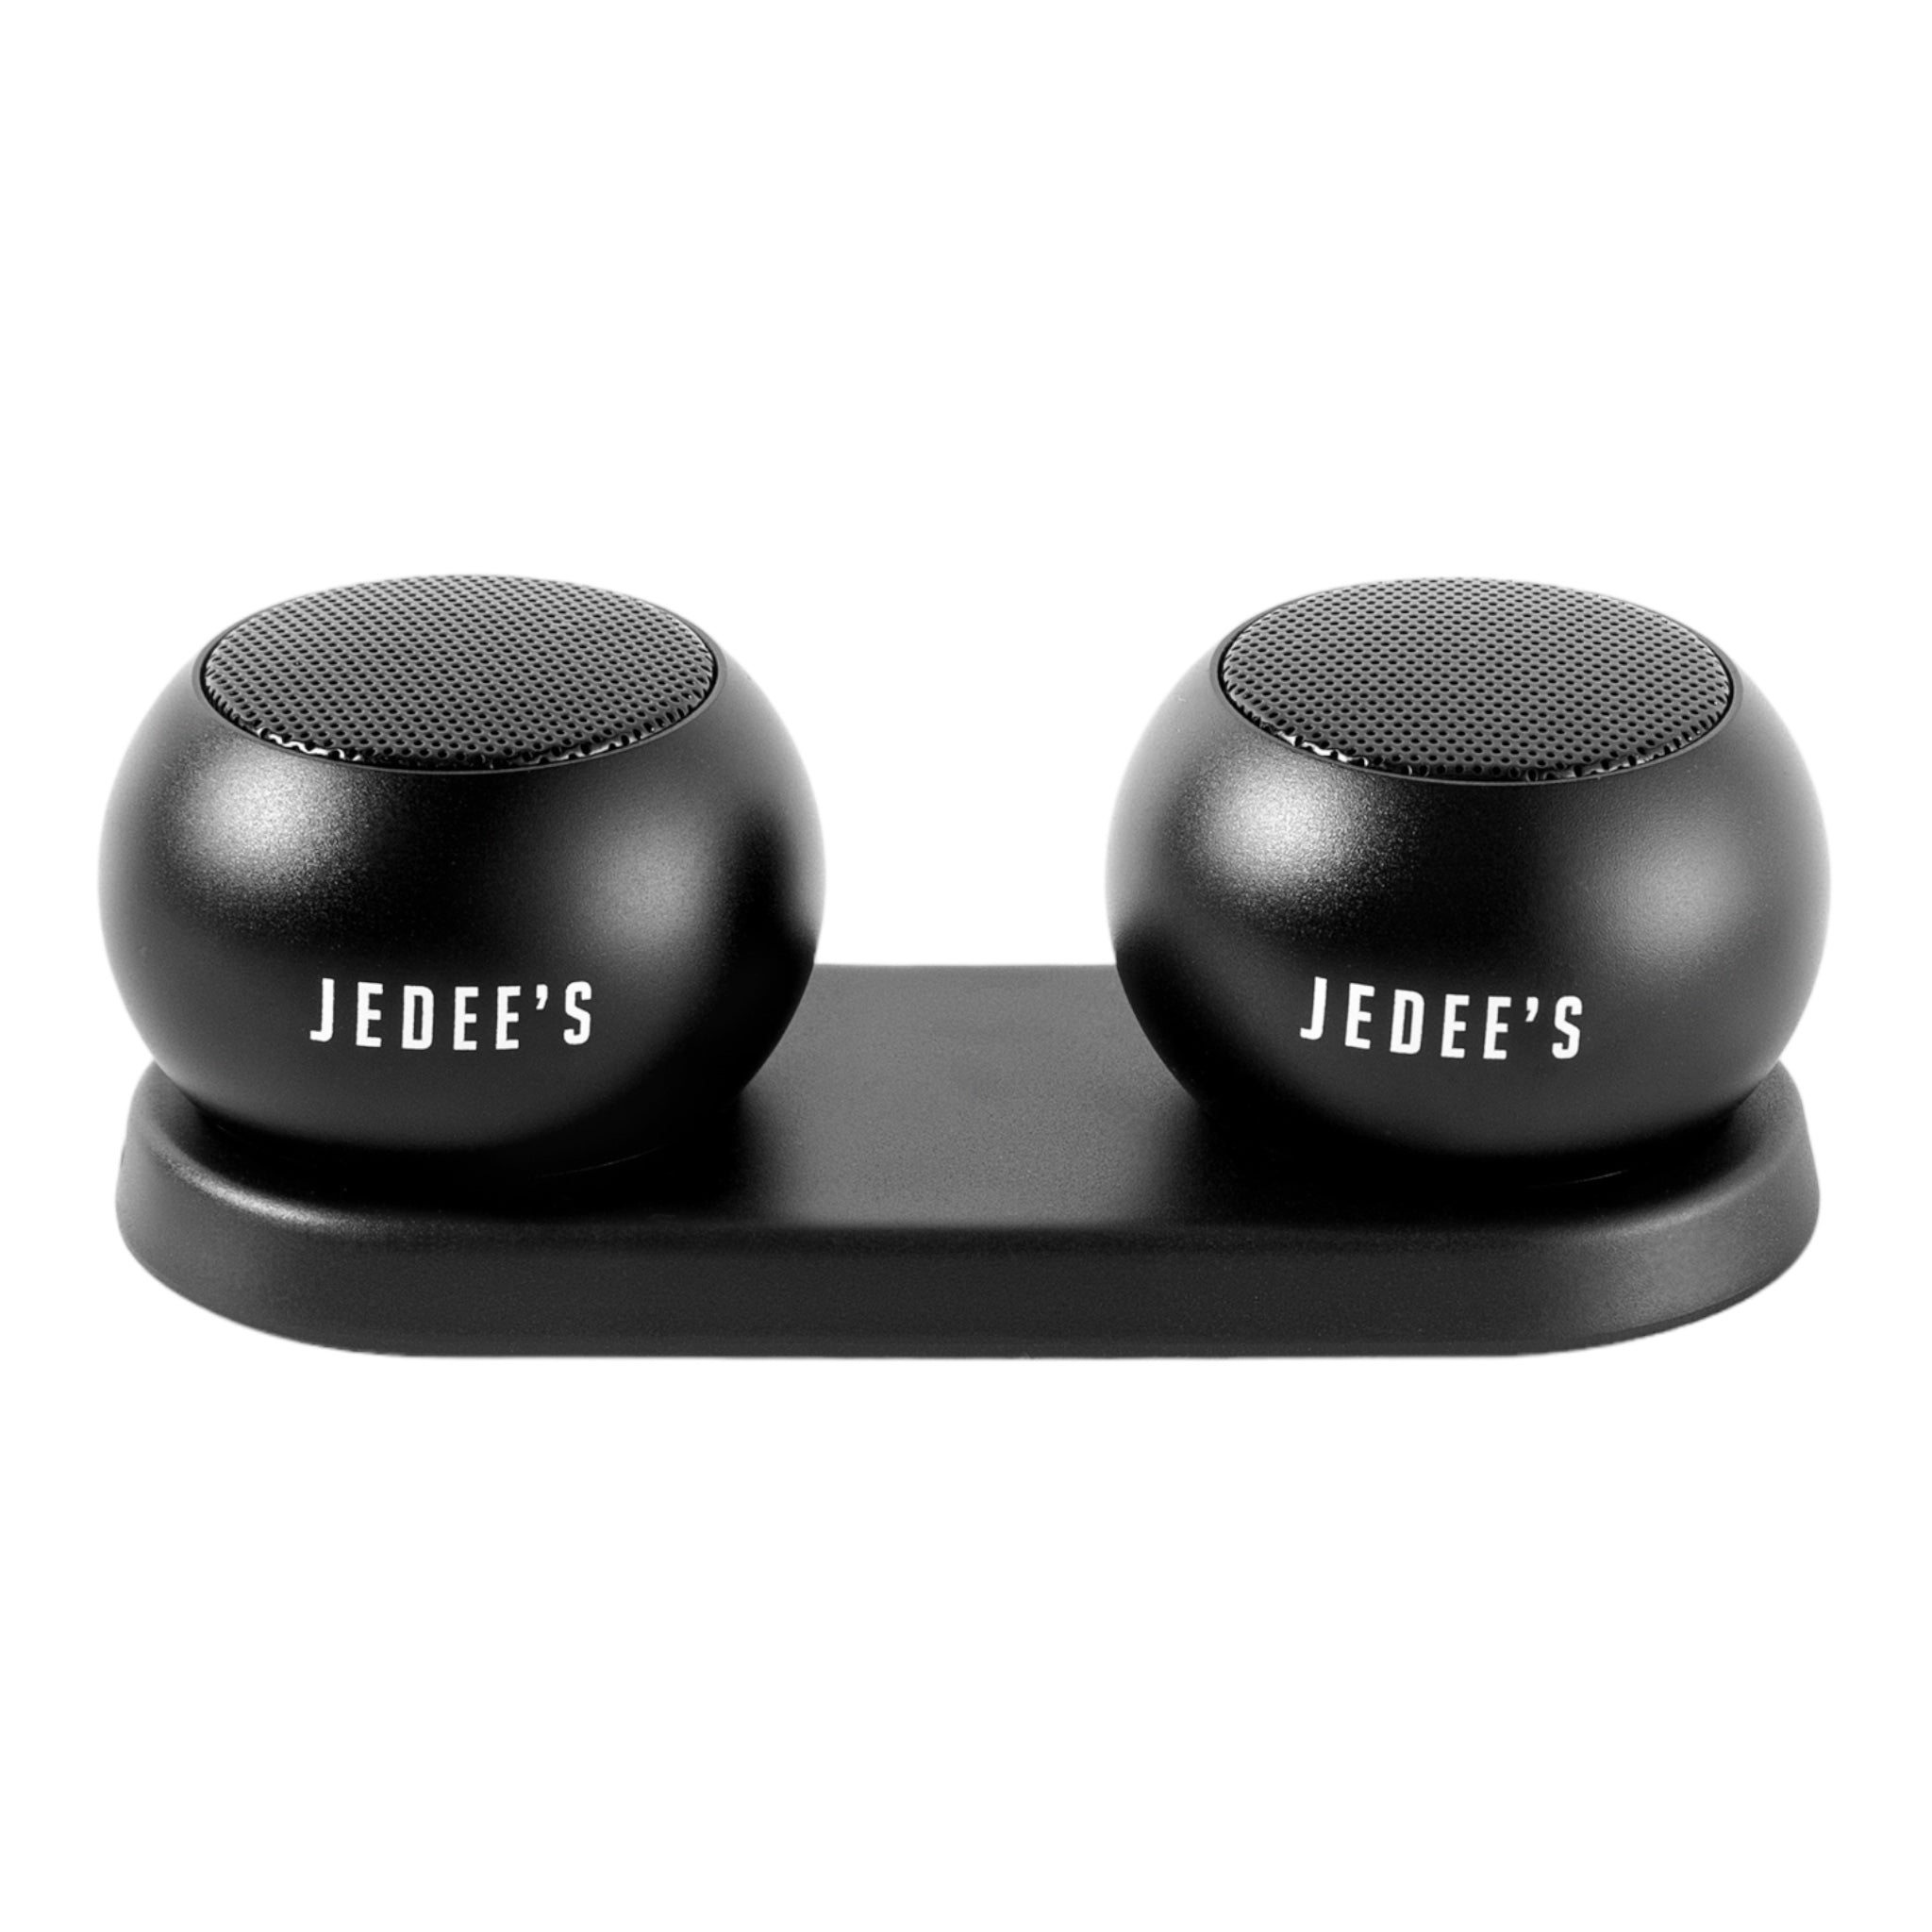 Mini Bluetooth duo speaker with magnetic charging station Jedee's